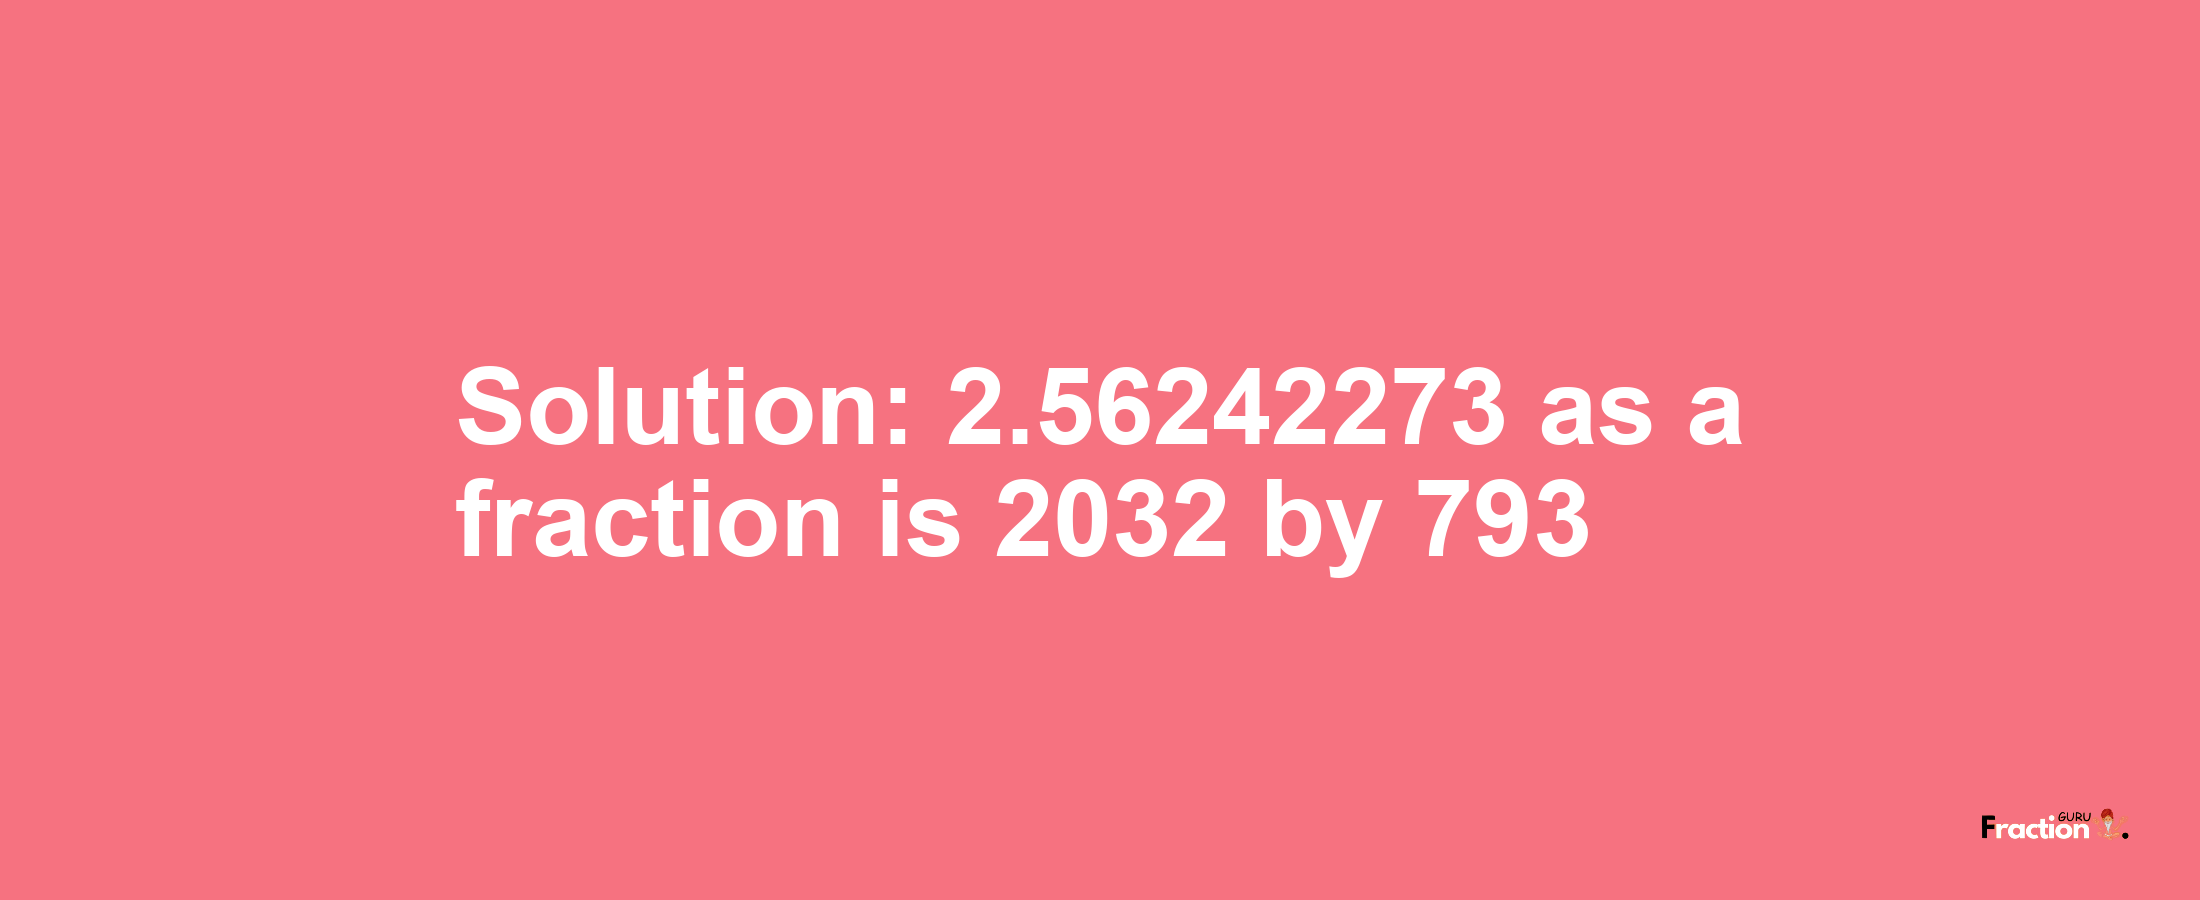 Solution:2.56242273 as a fraction is 2032/793